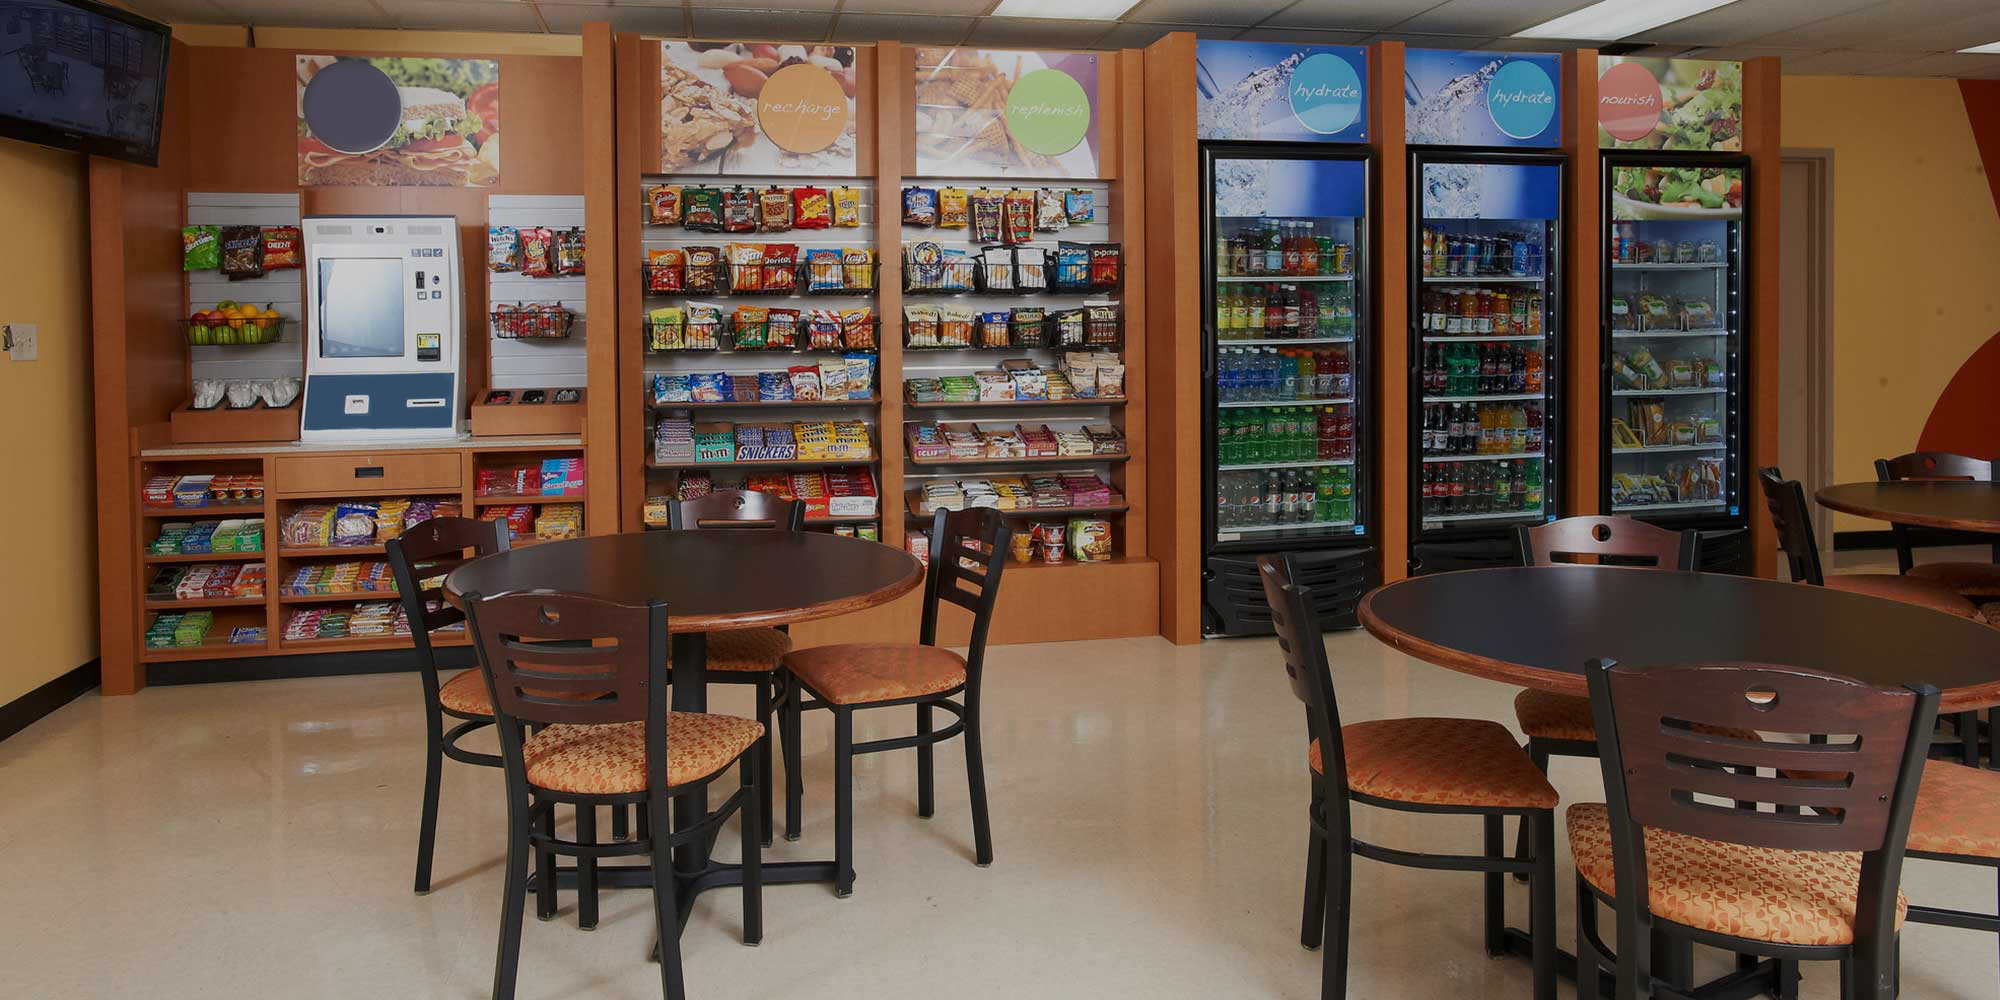 Variety of payment options for vending machines